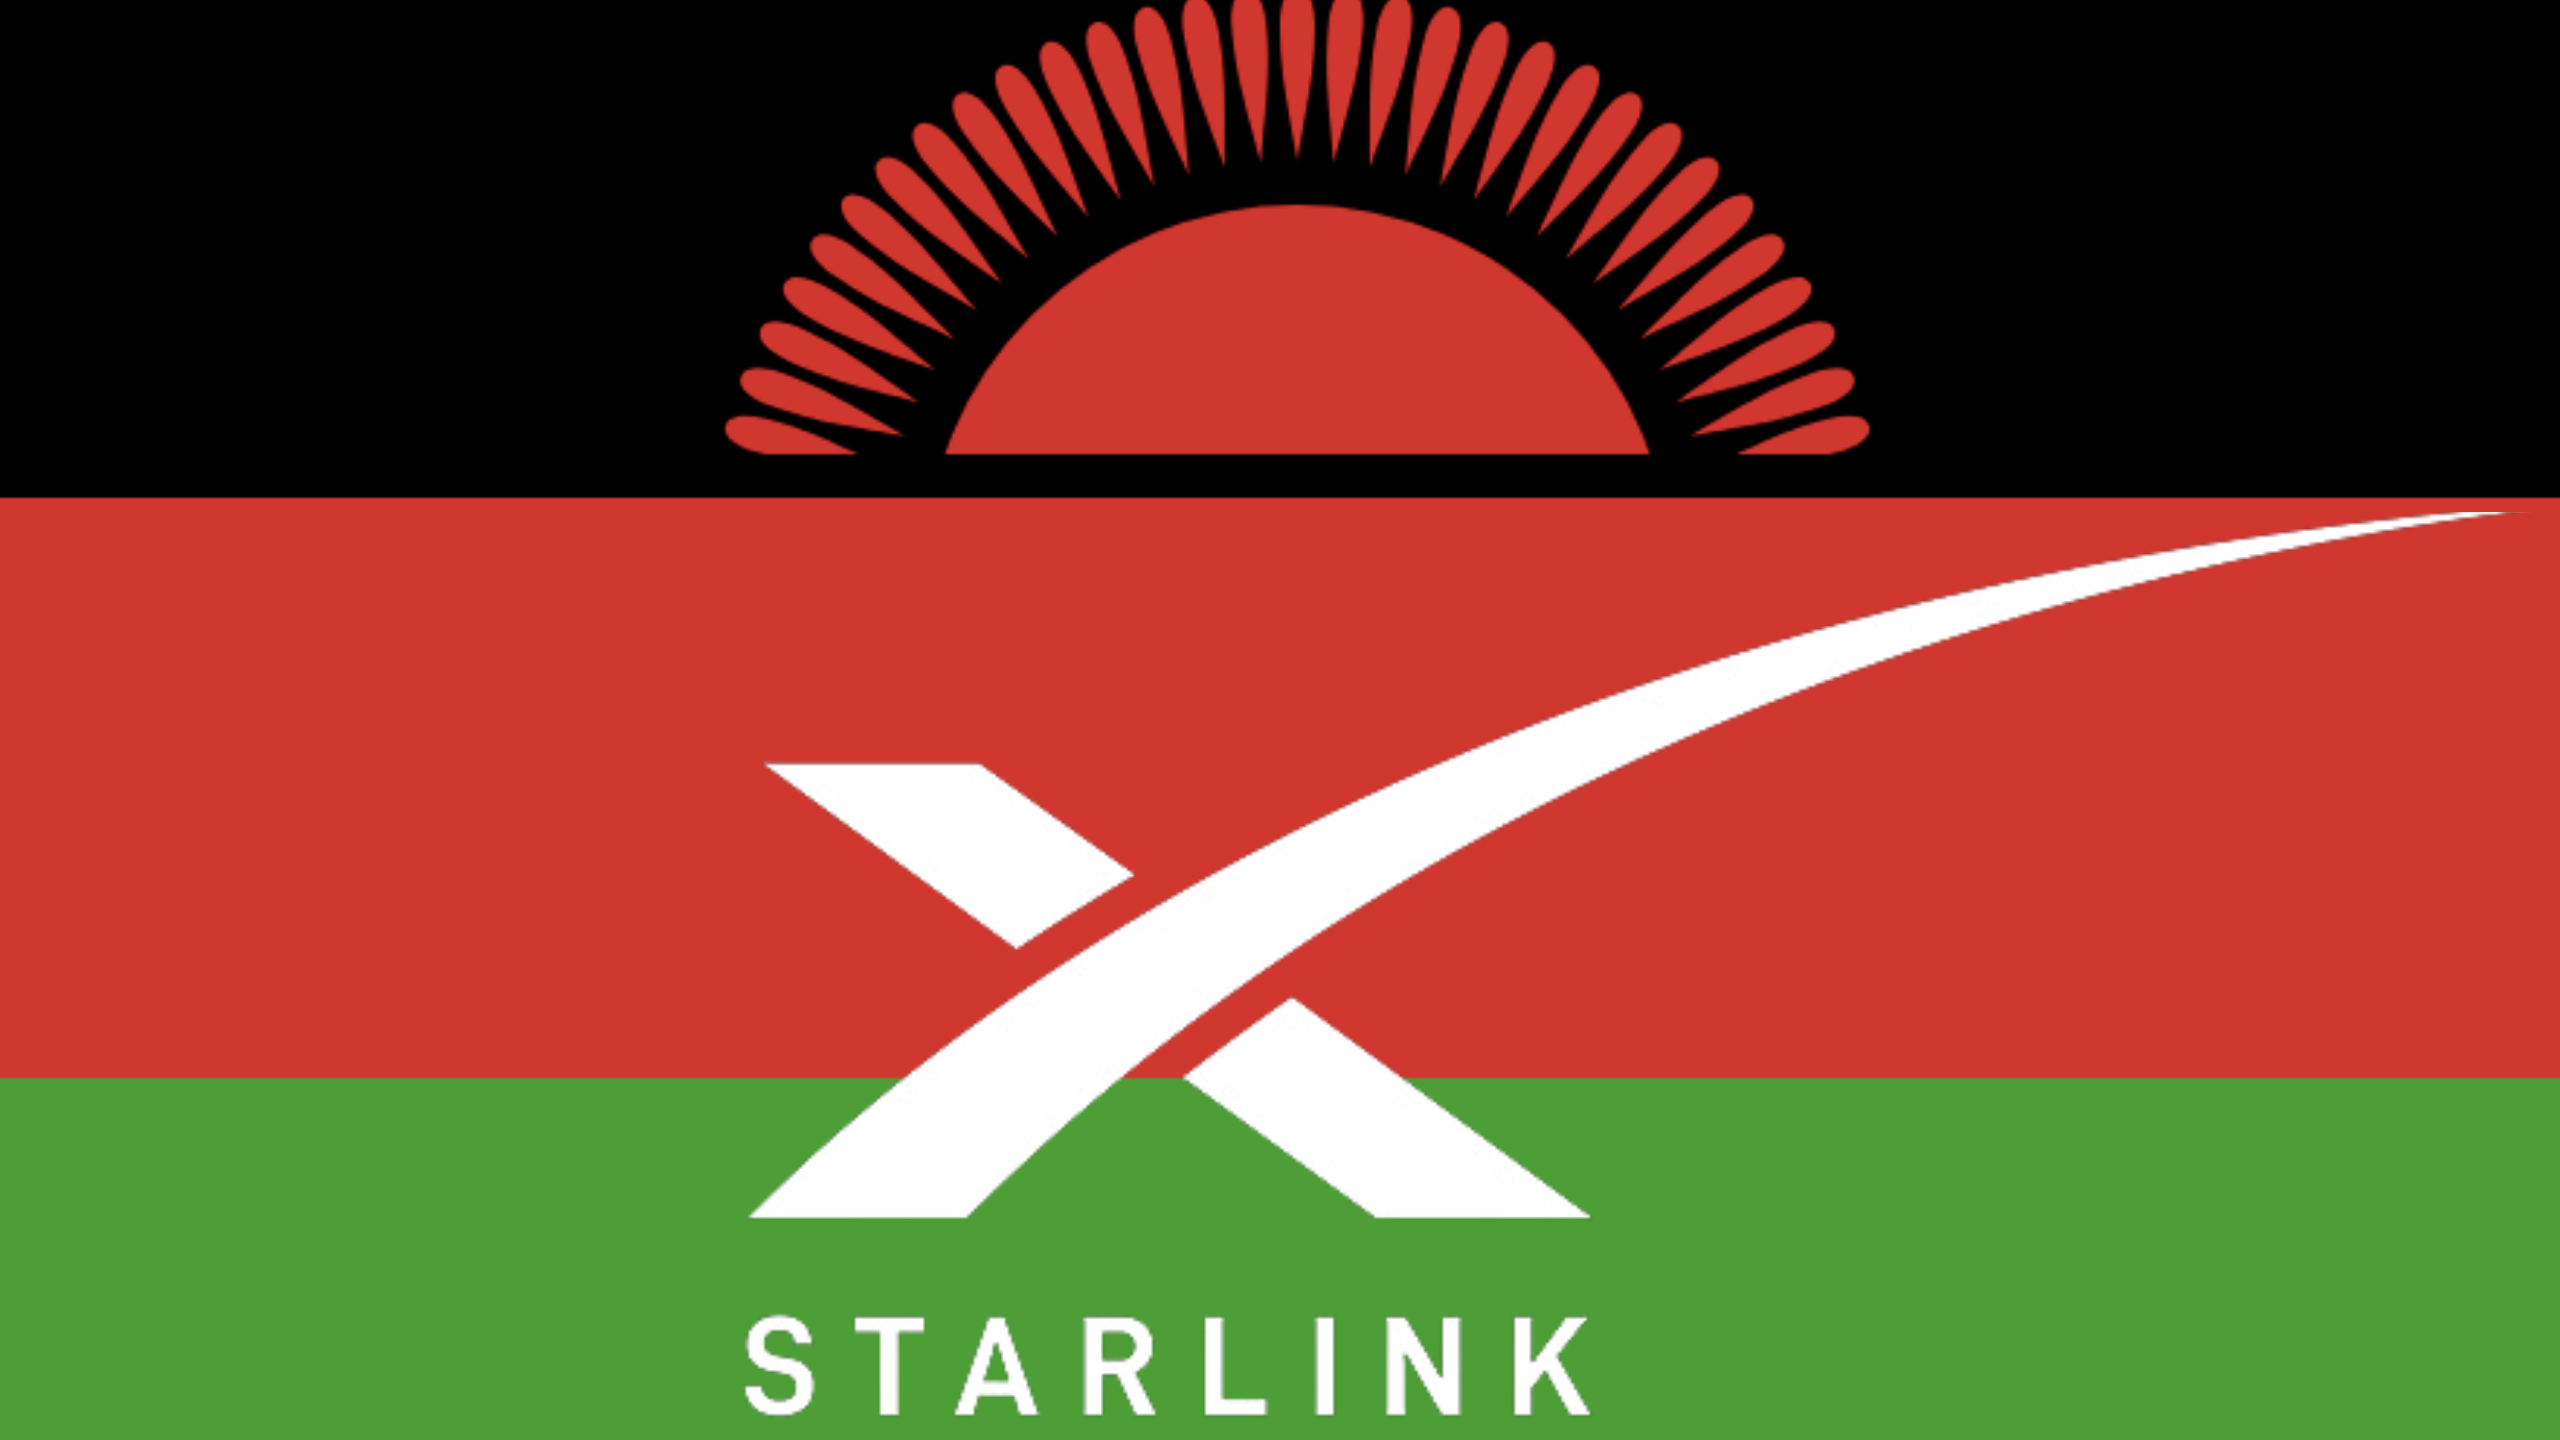 Starlink is coming to Malawi; MACRA director- Welcome to Malawi, Starlink